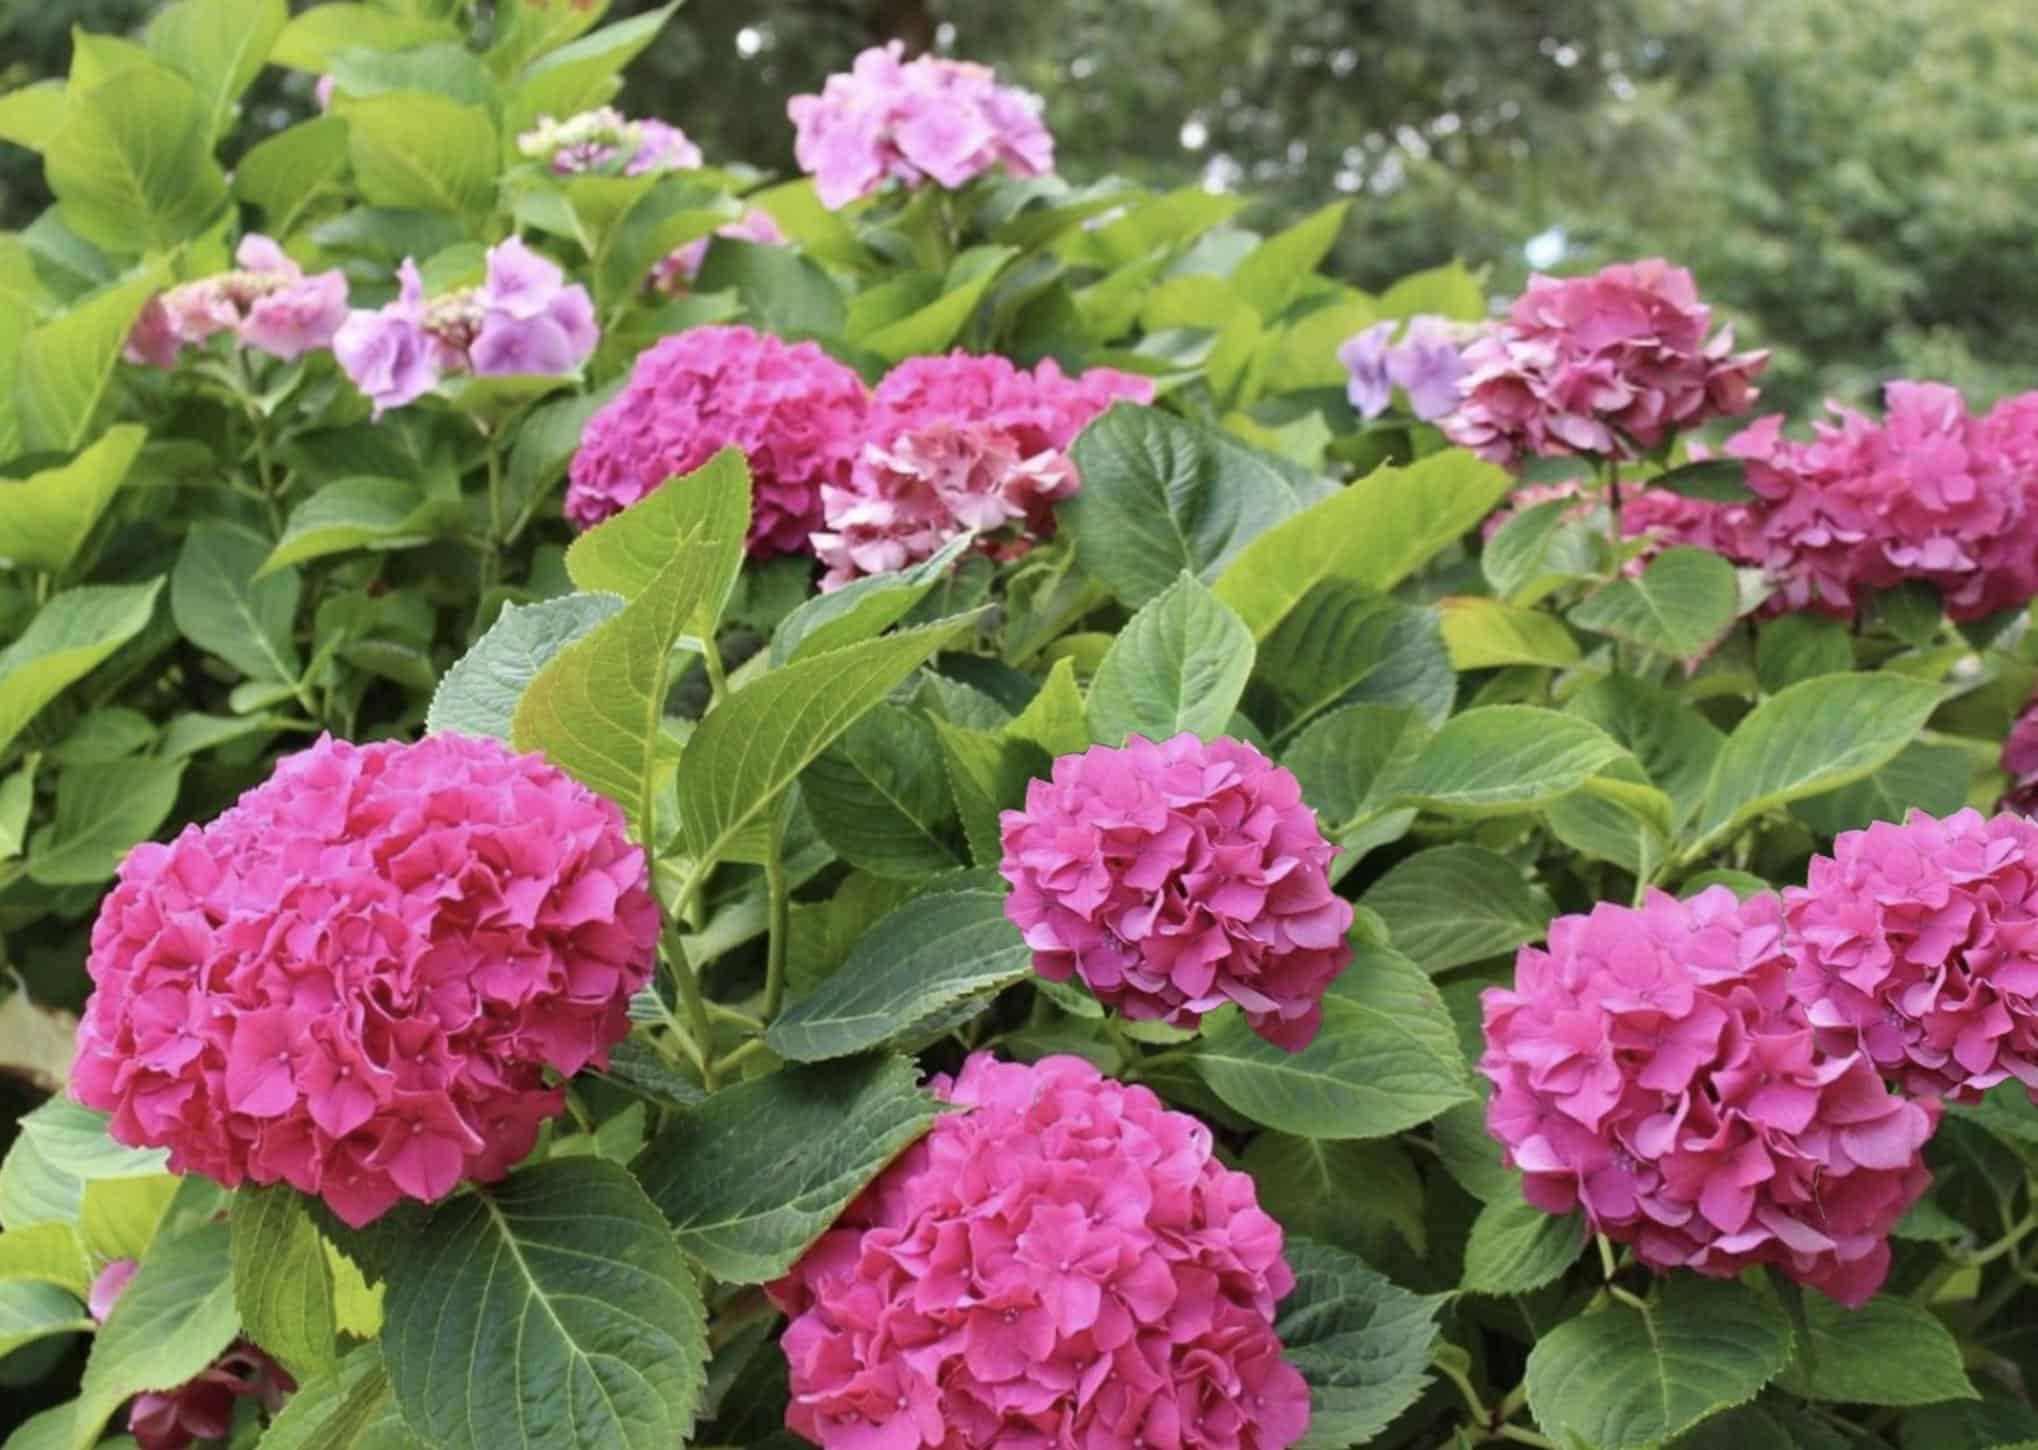 Everything You Need to Know About Growing Hydrangeas